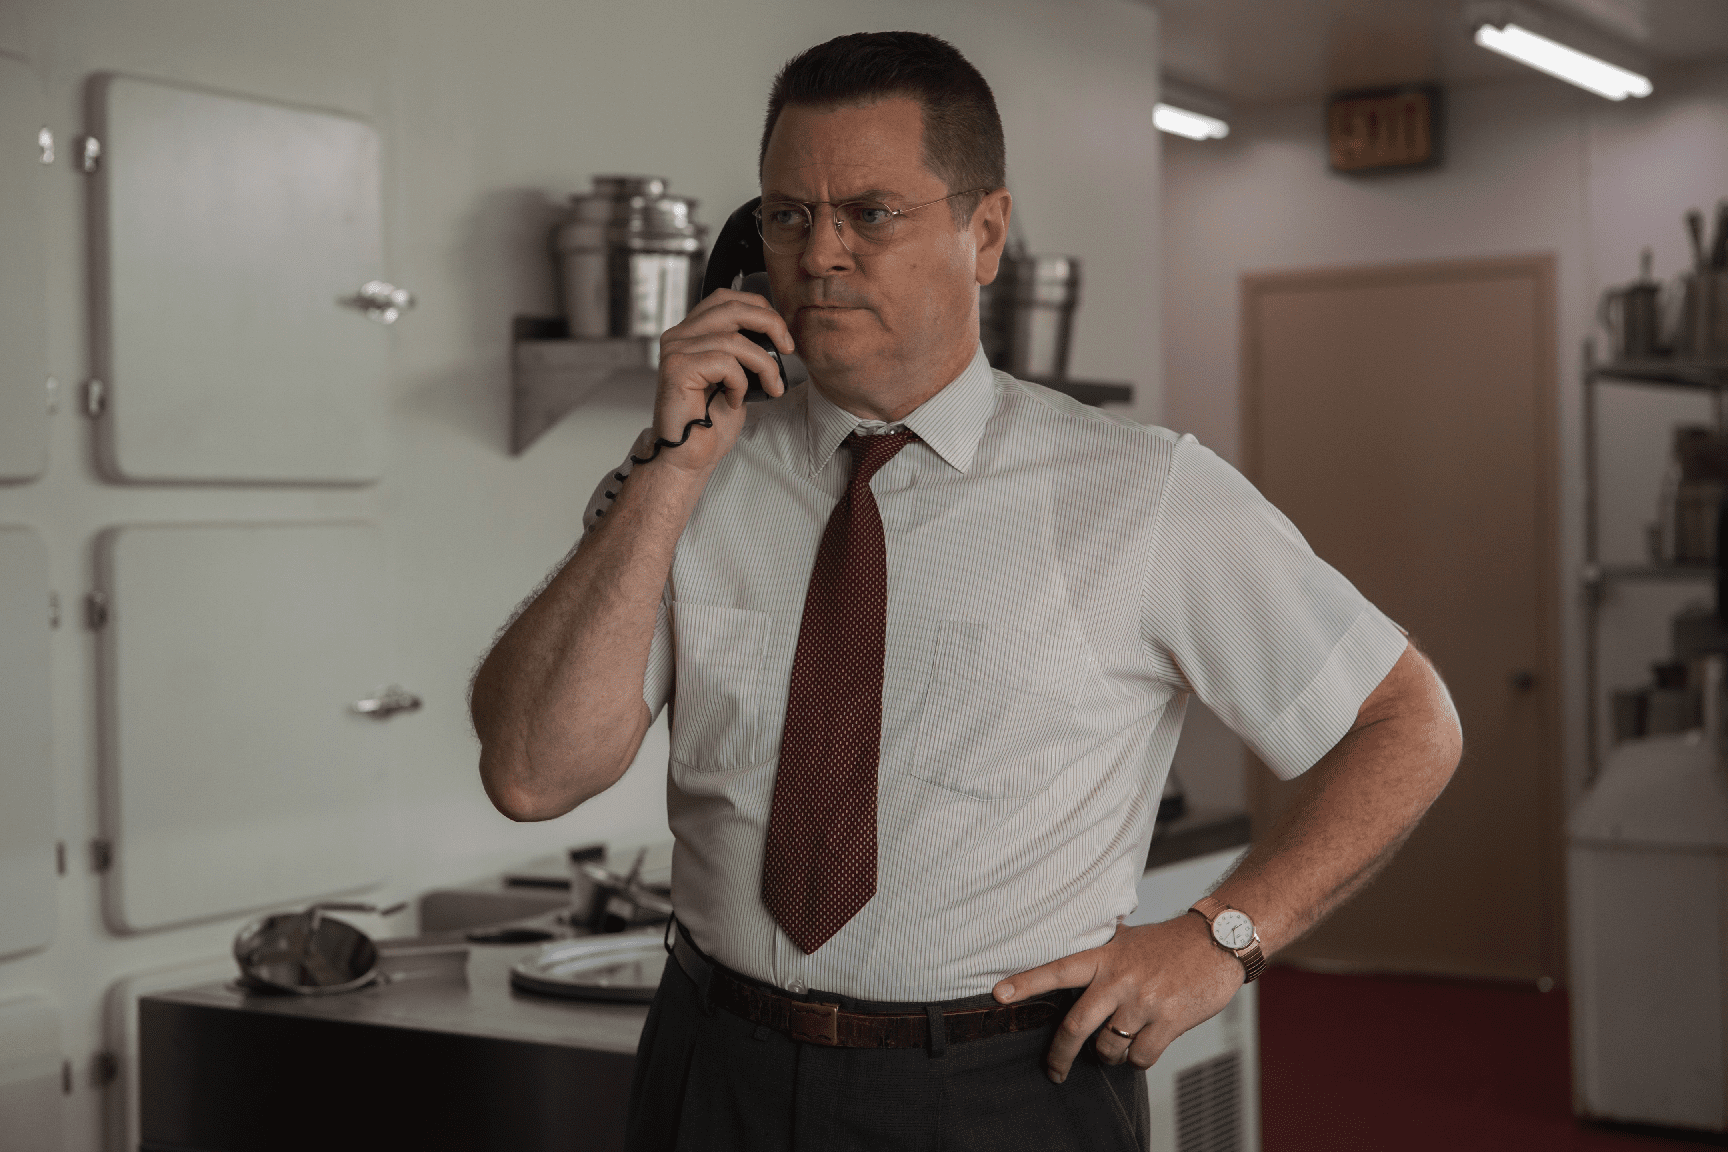 Dick McDonald (Nick Offerman) makes a call in "The Founder". (Shaw Organisation)